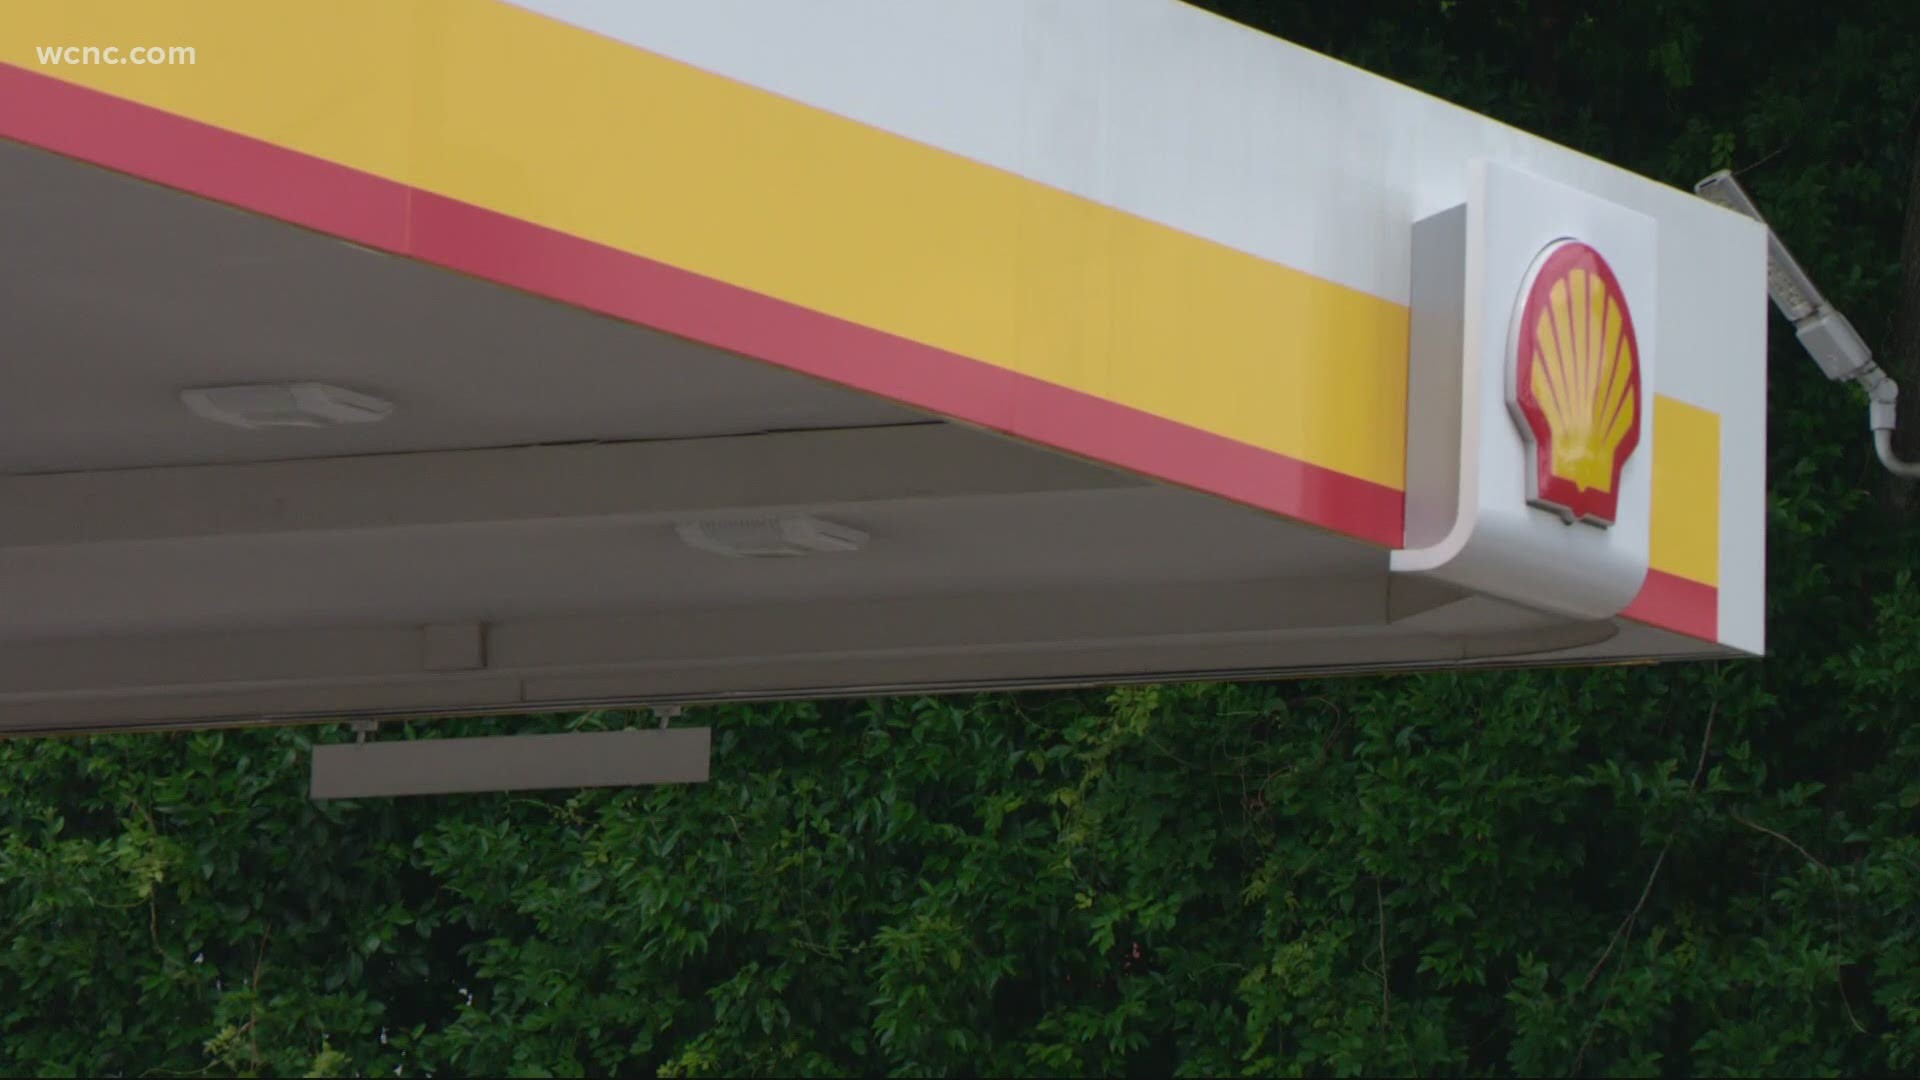 Price gouging laws are in effect for both North Carolina and South Carolina over gasoline shortages from the Colonial Pipeline shutdown.